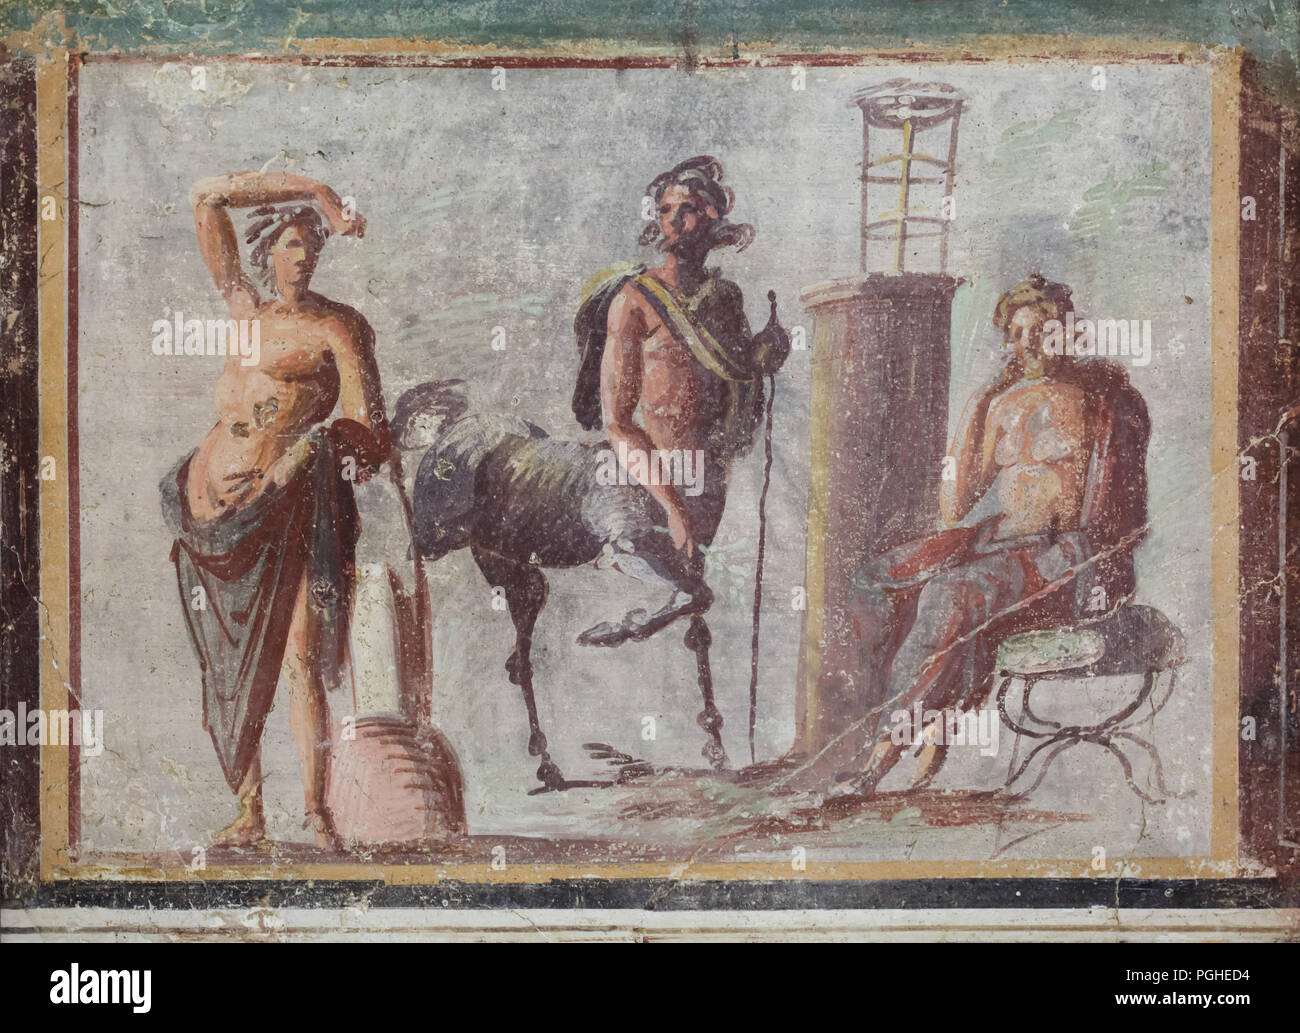 Centaur Chiron stands between Apollo on the left and Asclepius on the right depicted in the Roman fresco dated from the 1st century BC on display in the National Archaeological Museum (Museo Archeologico Nazionale di Napoli) in Naples, Campania, Italy. Centaur Chiron, inventor of medicine and surgery, taught them the art of medicine. Stock Photo